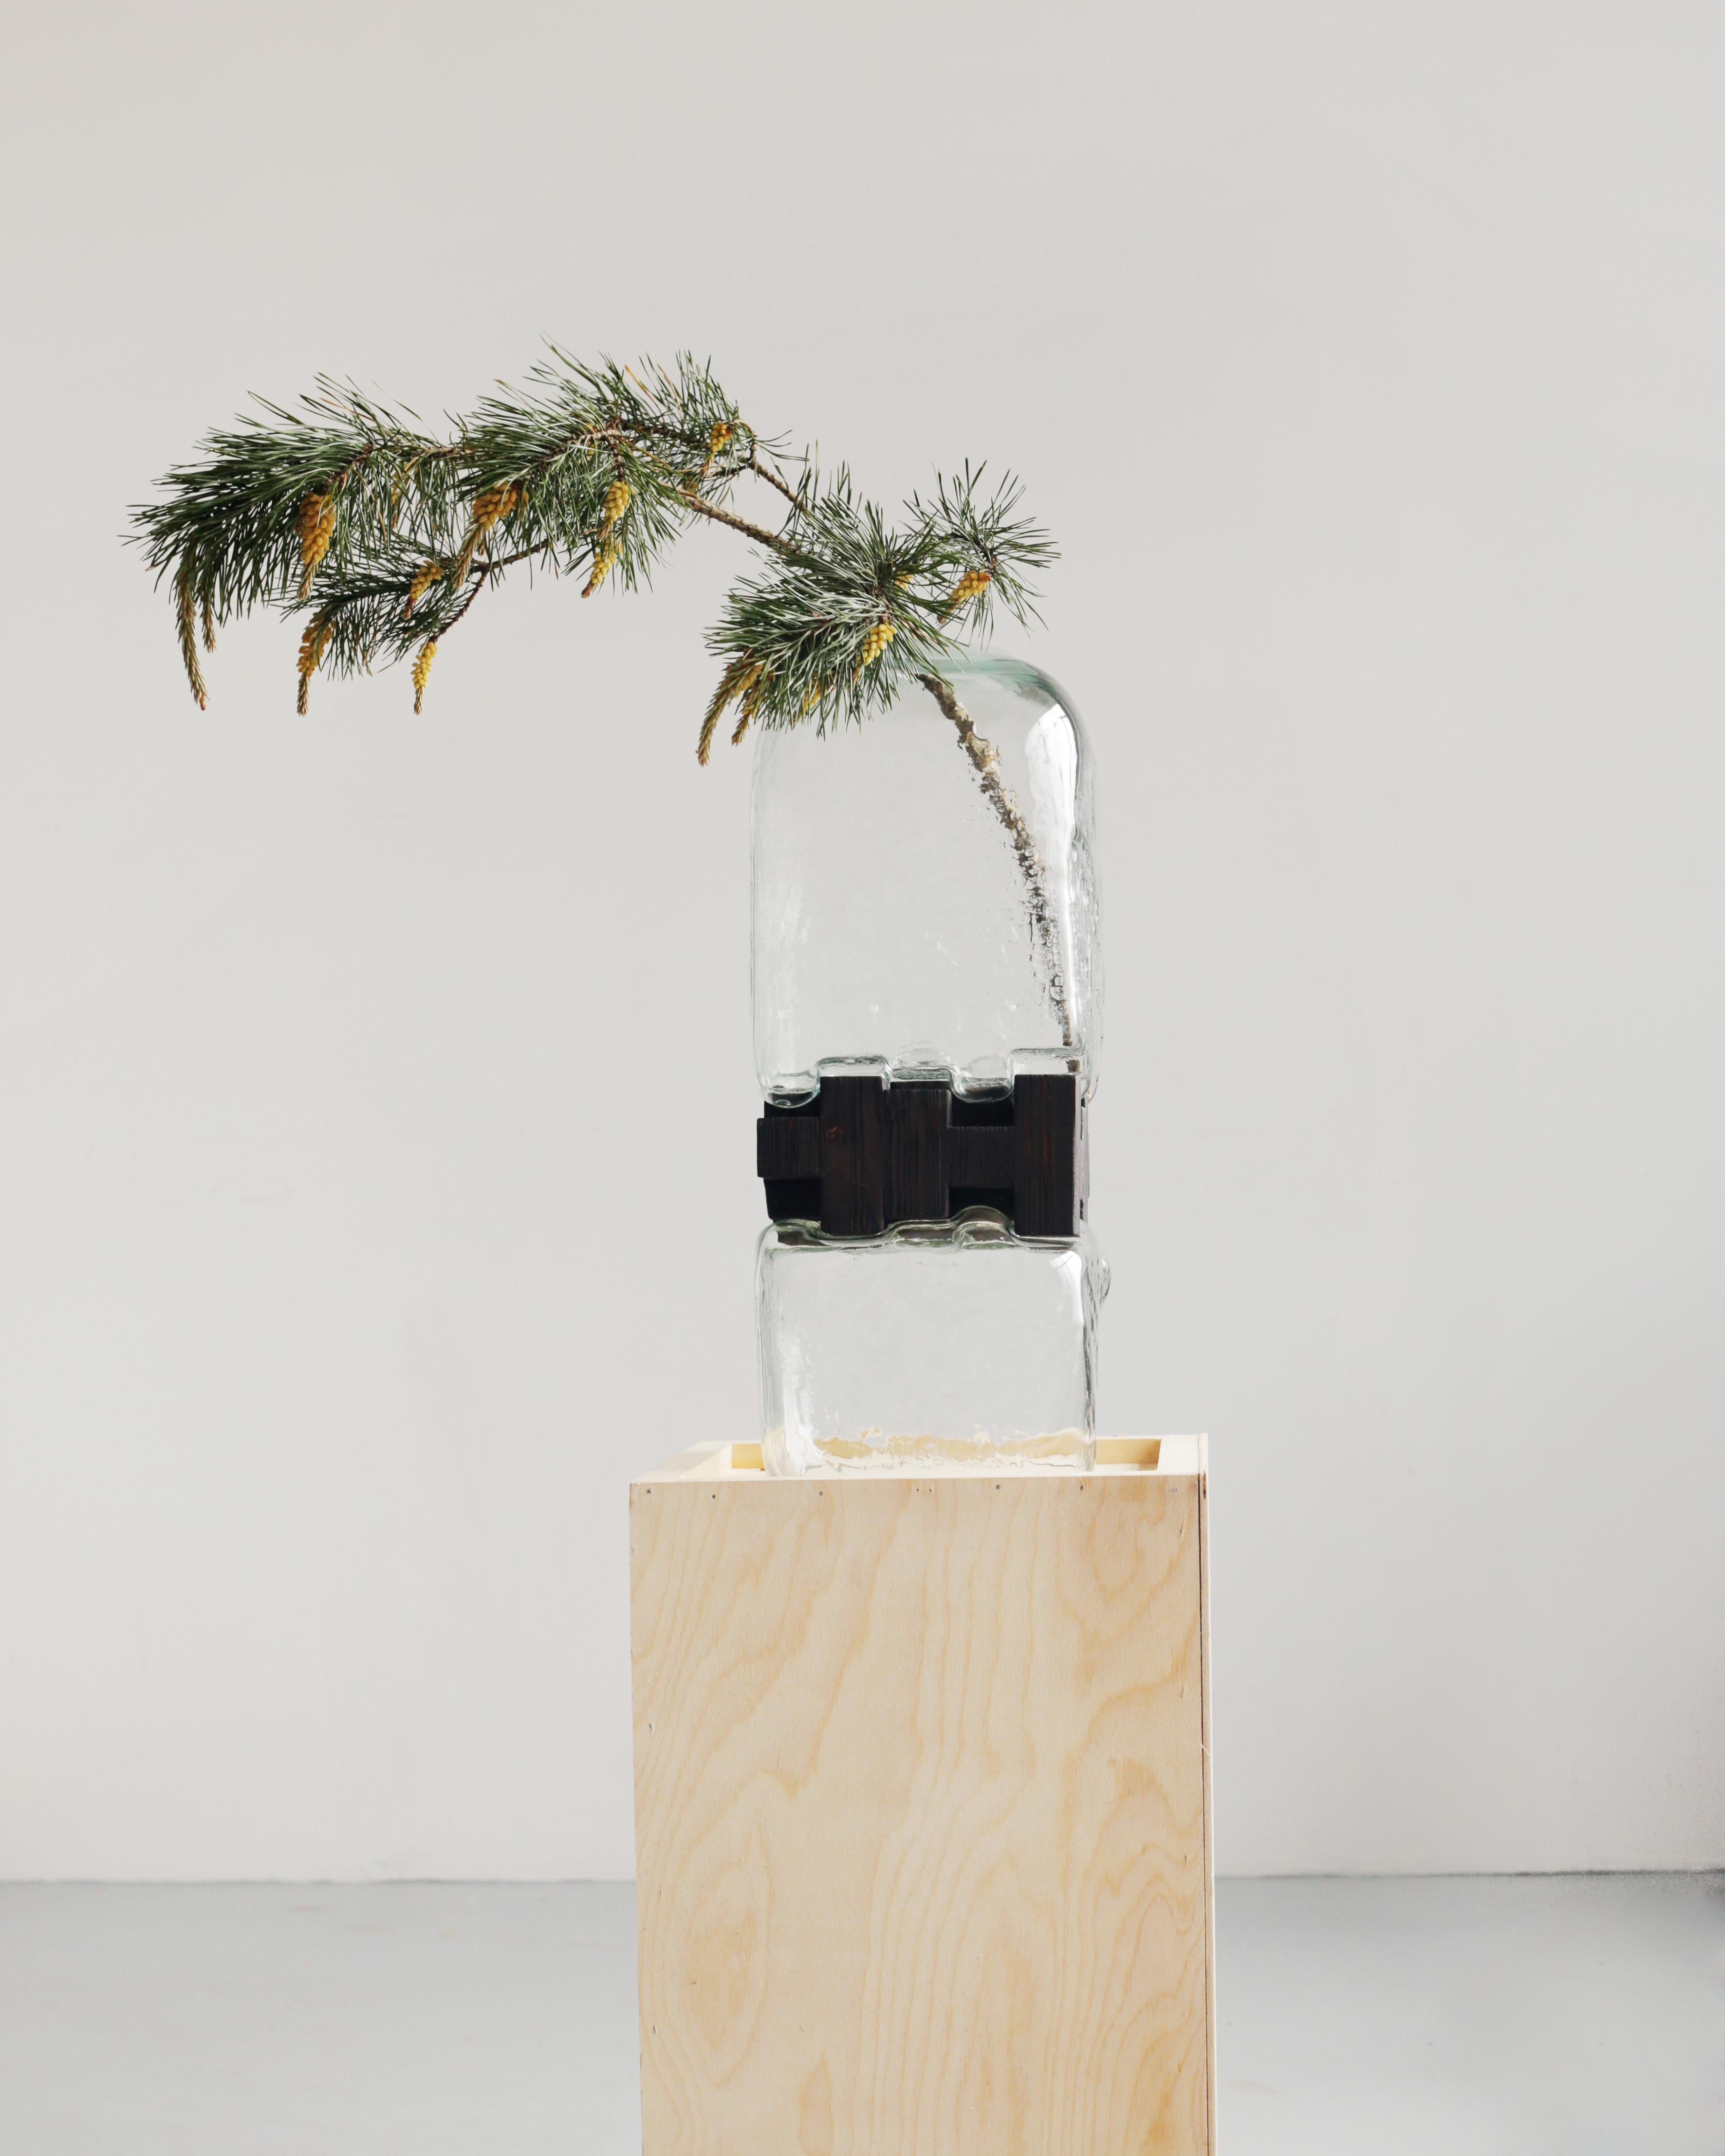 Pixel vase by Drozhdini
Dimensions: 22 x 22 x 65 cm
Materials: Glass, Western European Pine

Design winner RUSSIAN PROJECT 2019. She entered the 20 best glass works in the world at the MILANO VETRO-35 competition in 2020 at Sala Della Balla,